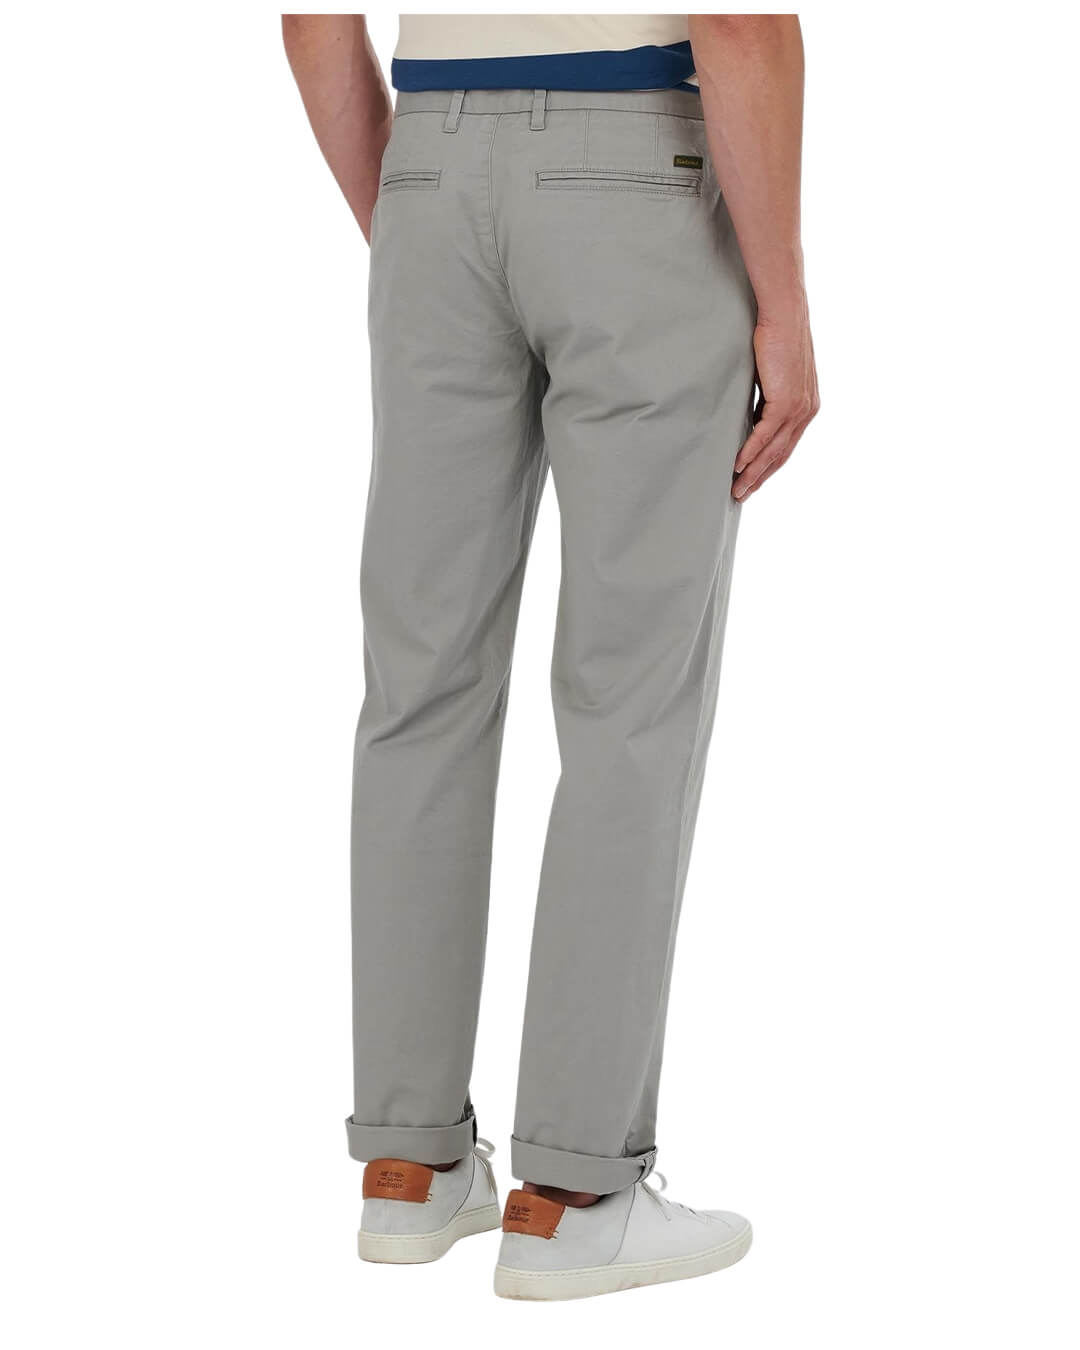 Barbour Trousers Barbour Neuston Stone Essential Chino Trousers